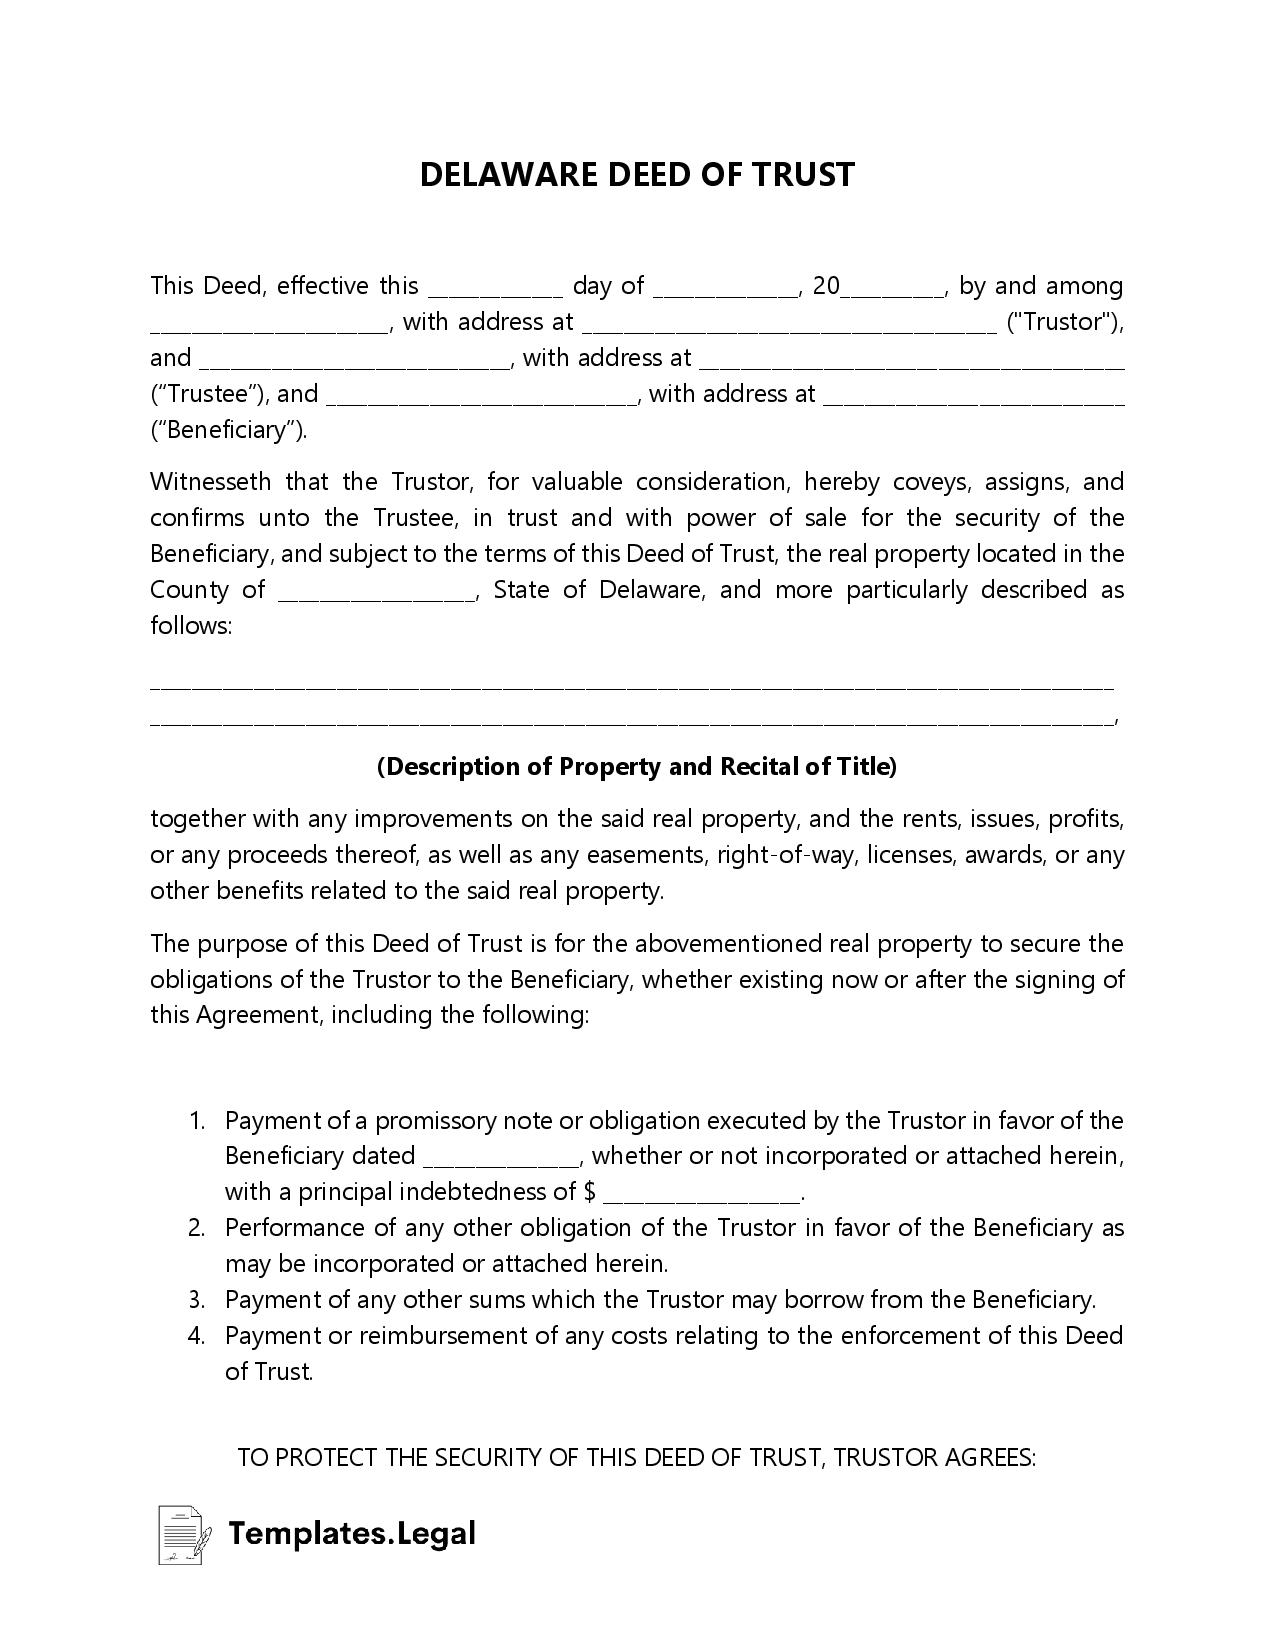 Delaware Deed of Trust - Templates.Legal